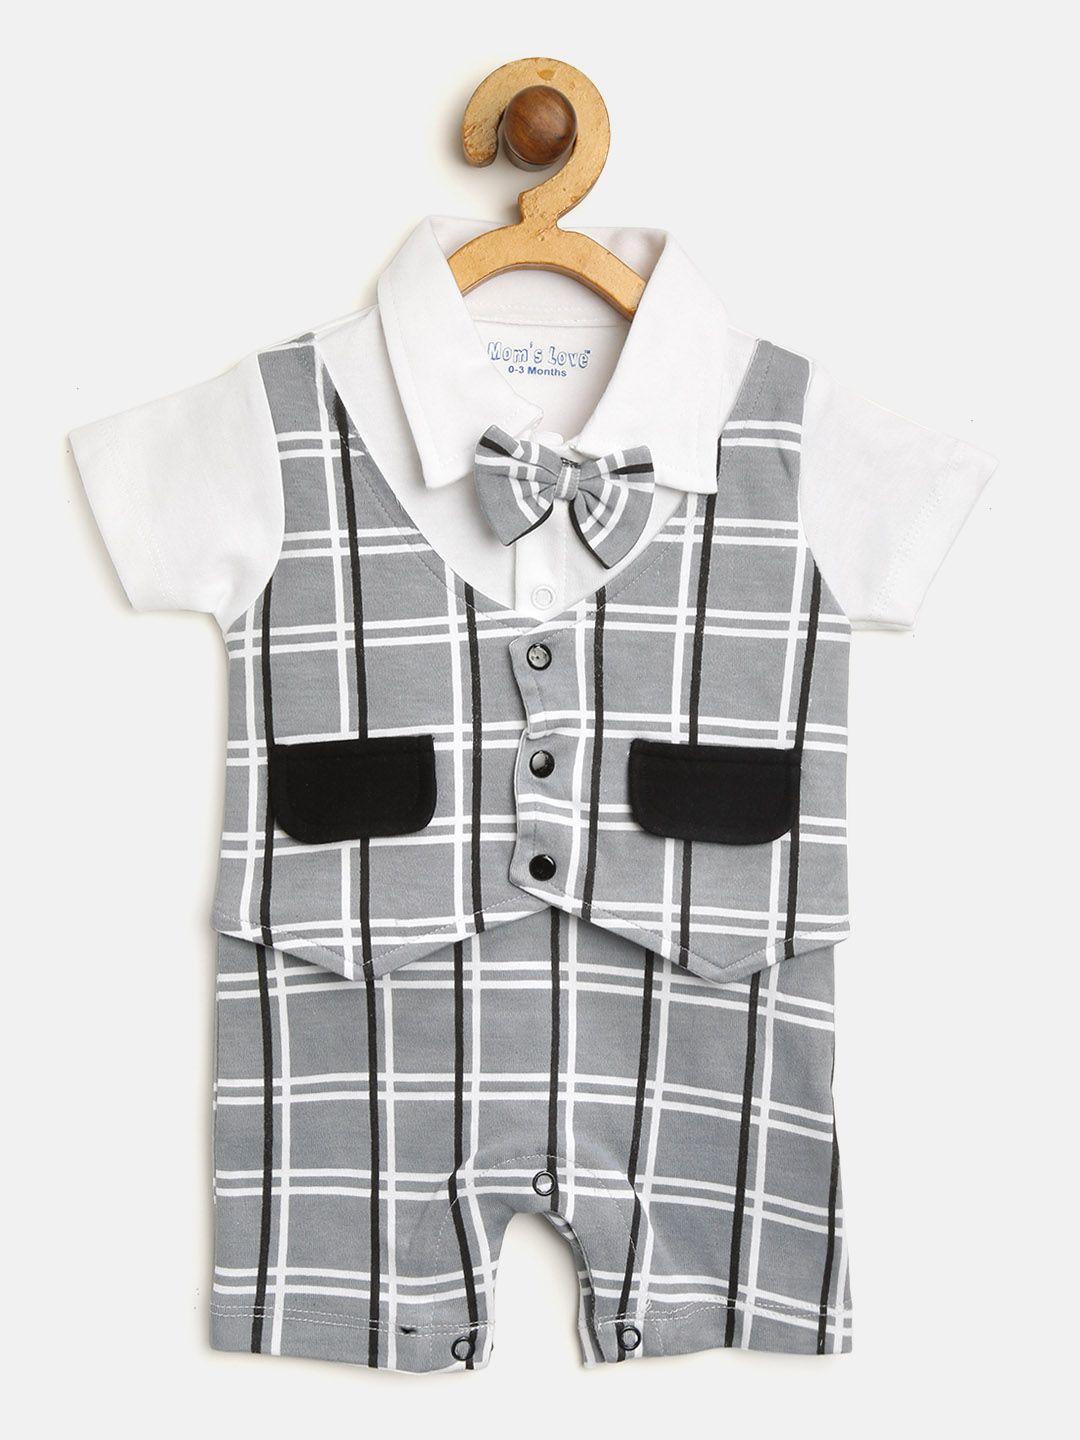 moms love boys grey & white checked rompers with attached waistcoat